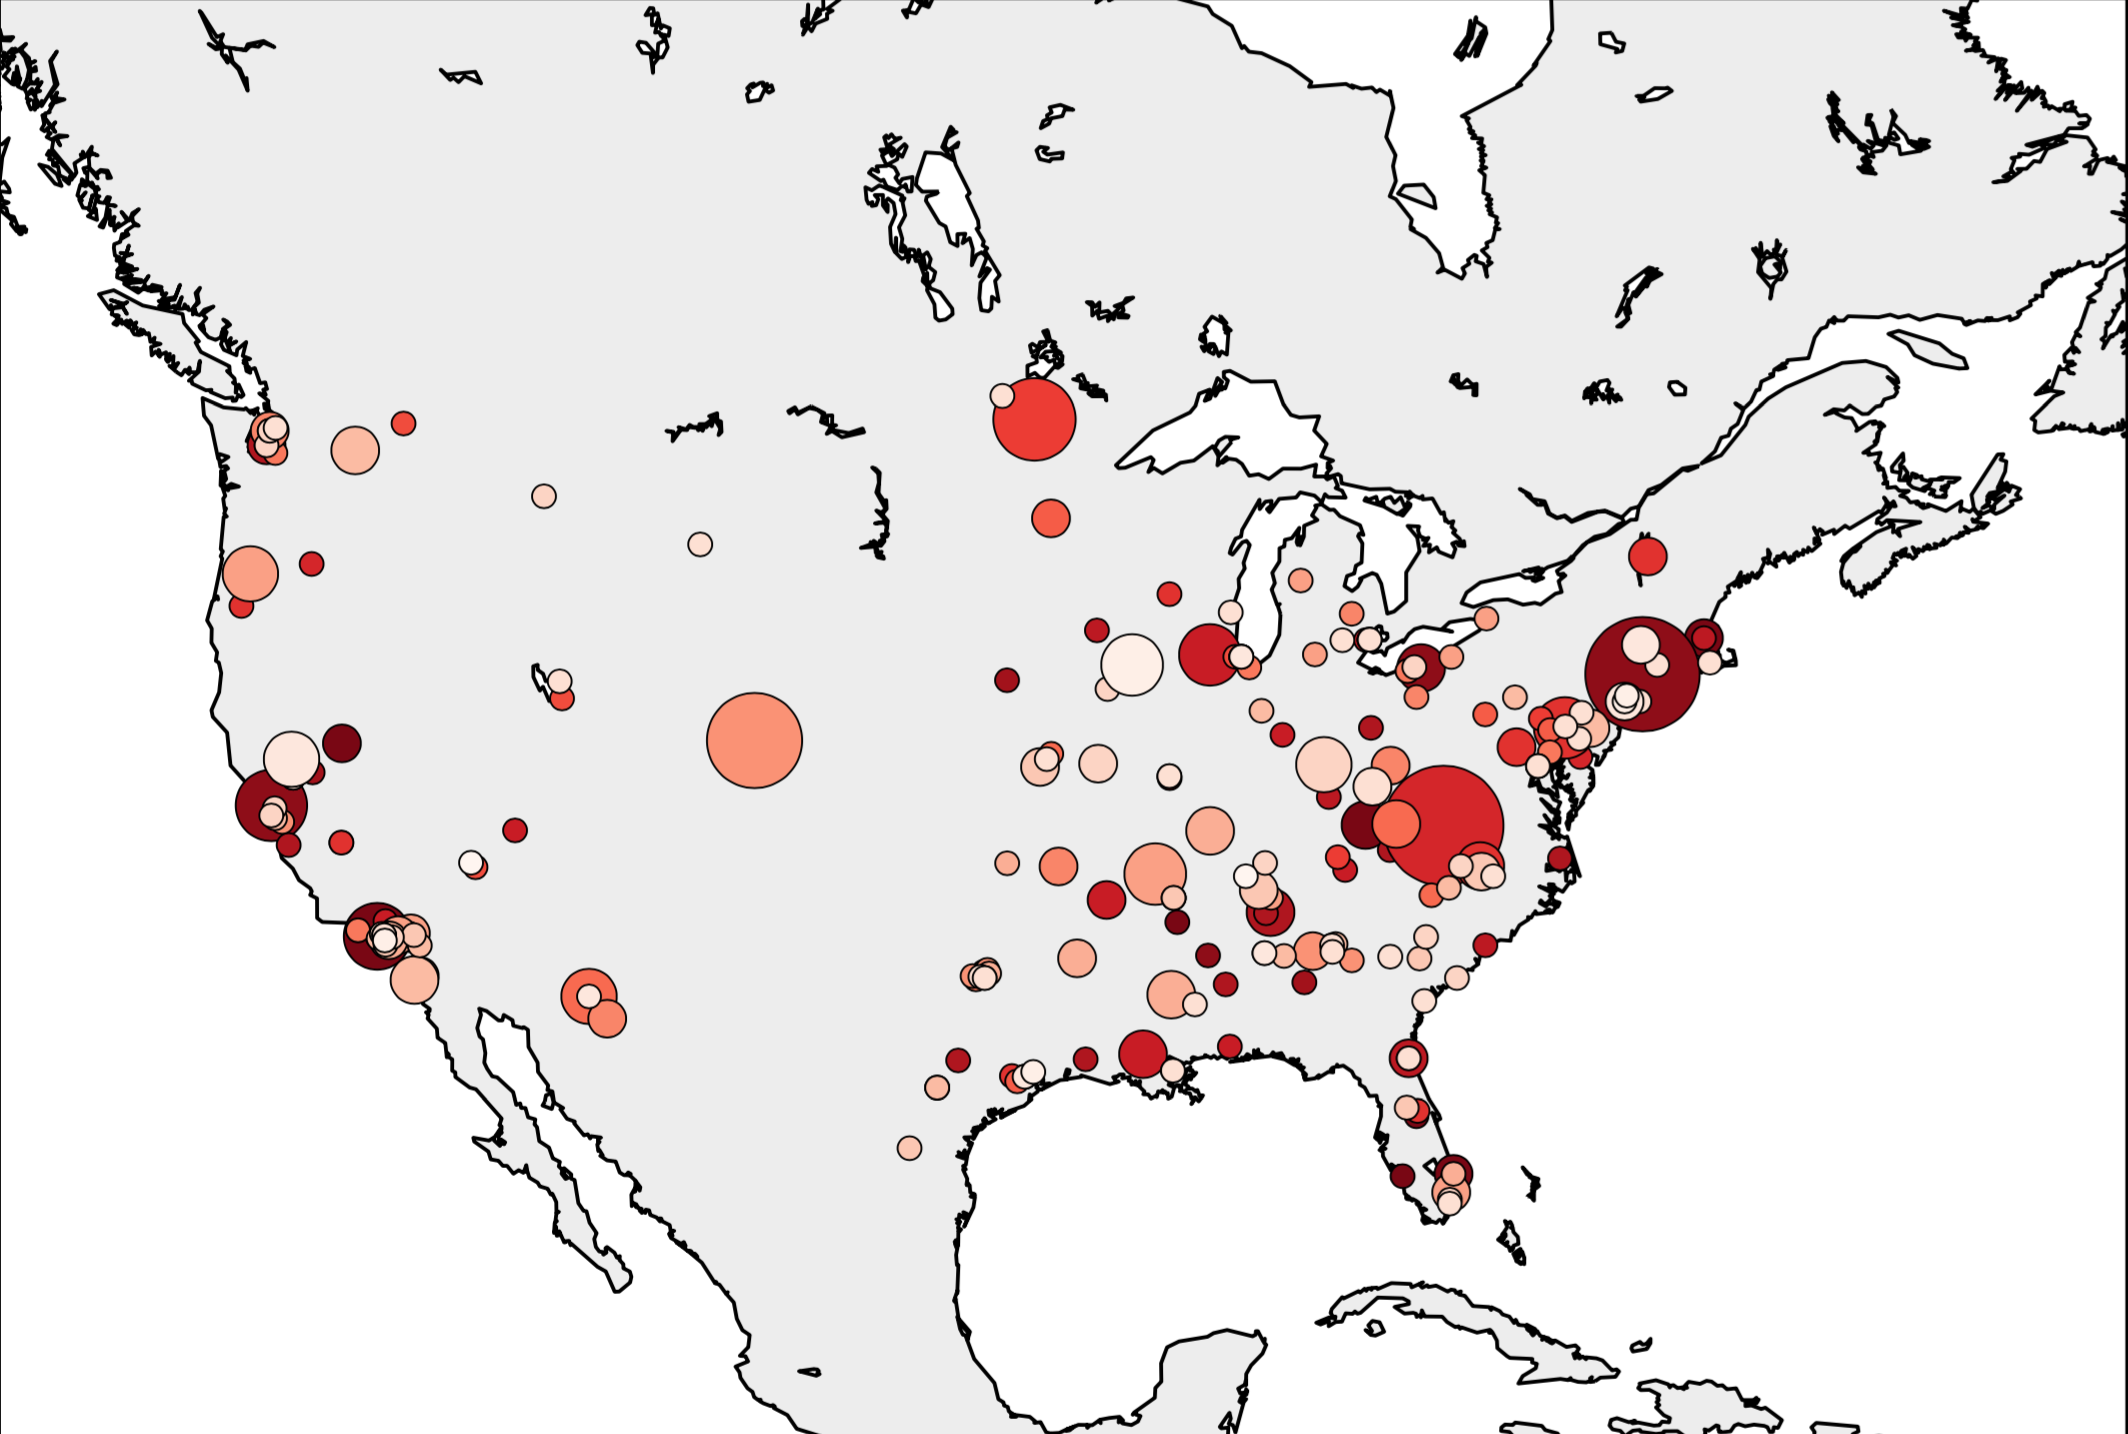 Map of US School Gun Violence form 1990 to 2013